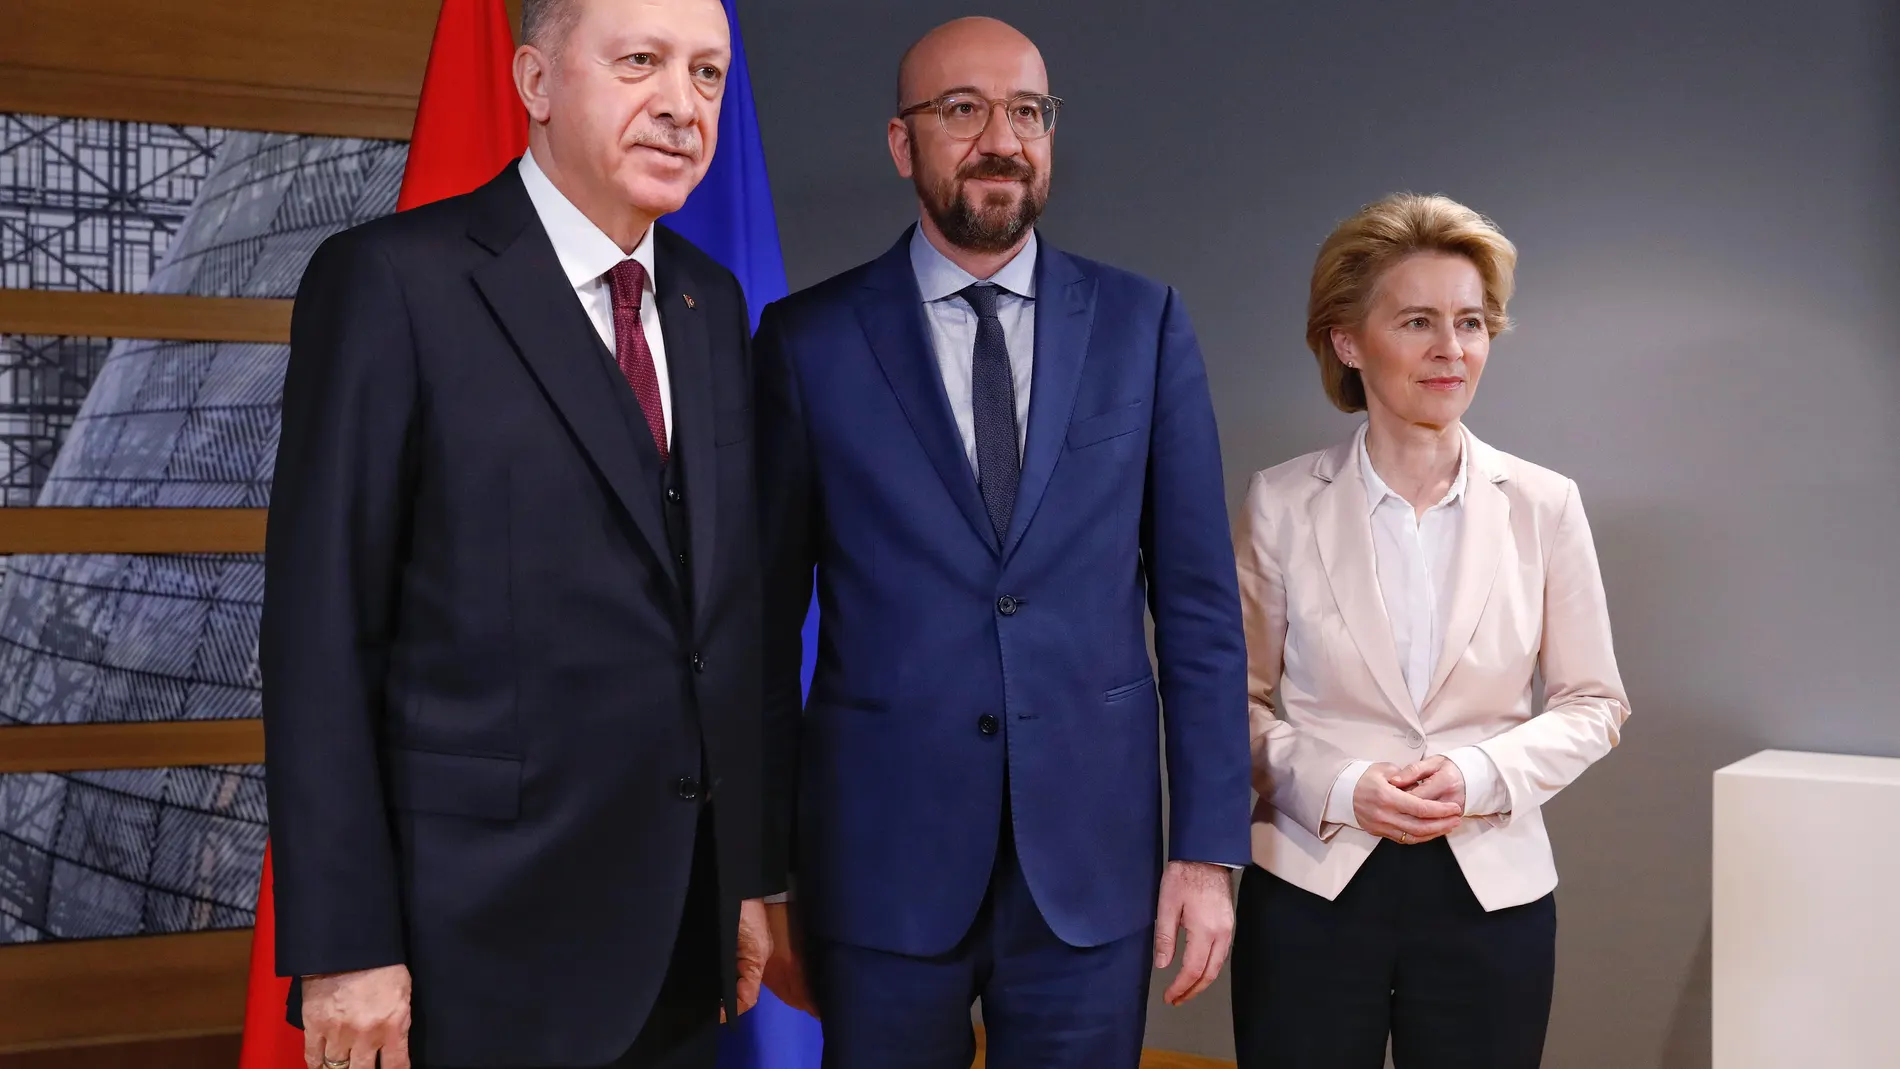 BRUSSELS, March 10, 2020 Turkish President Recep Tayyip Erdogan, European Council President Charles Michel and European Commission President Ursula von der Leyen (L to R) pose for a photo prior to their meeting in Brussels, Belgium, March 9, 2020. The European Union (EU) will check up with Turkey on the implementation of the 2016 migration deal, European Council President Charles Michel said on Monday. (European Union/Handout via Xinhua) (Foto de ARCHIVO) 10/03/2020